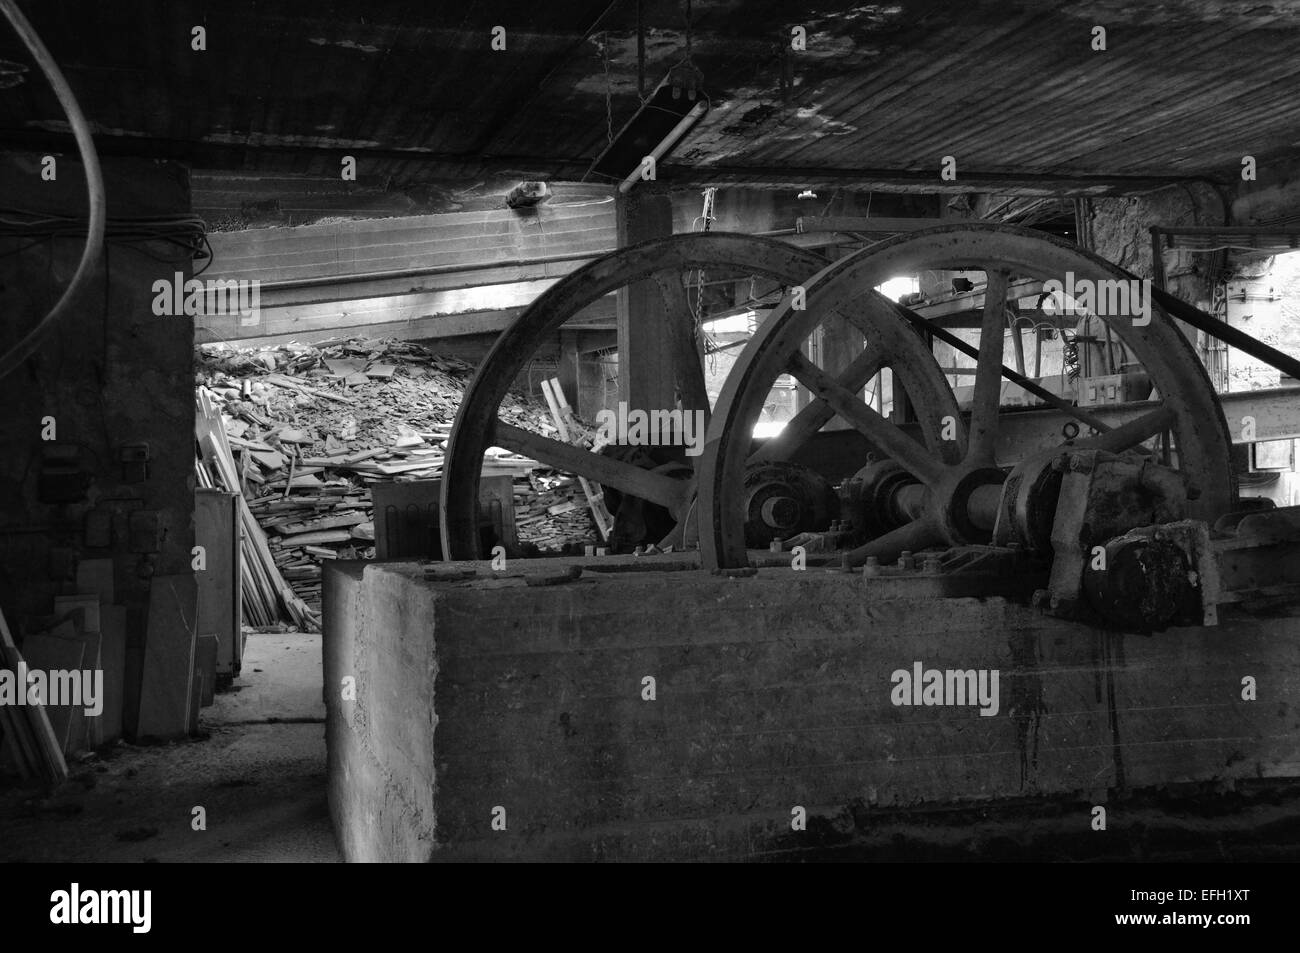 Rusty machinery in abandoned factory interior. Black and white. Stock Photo